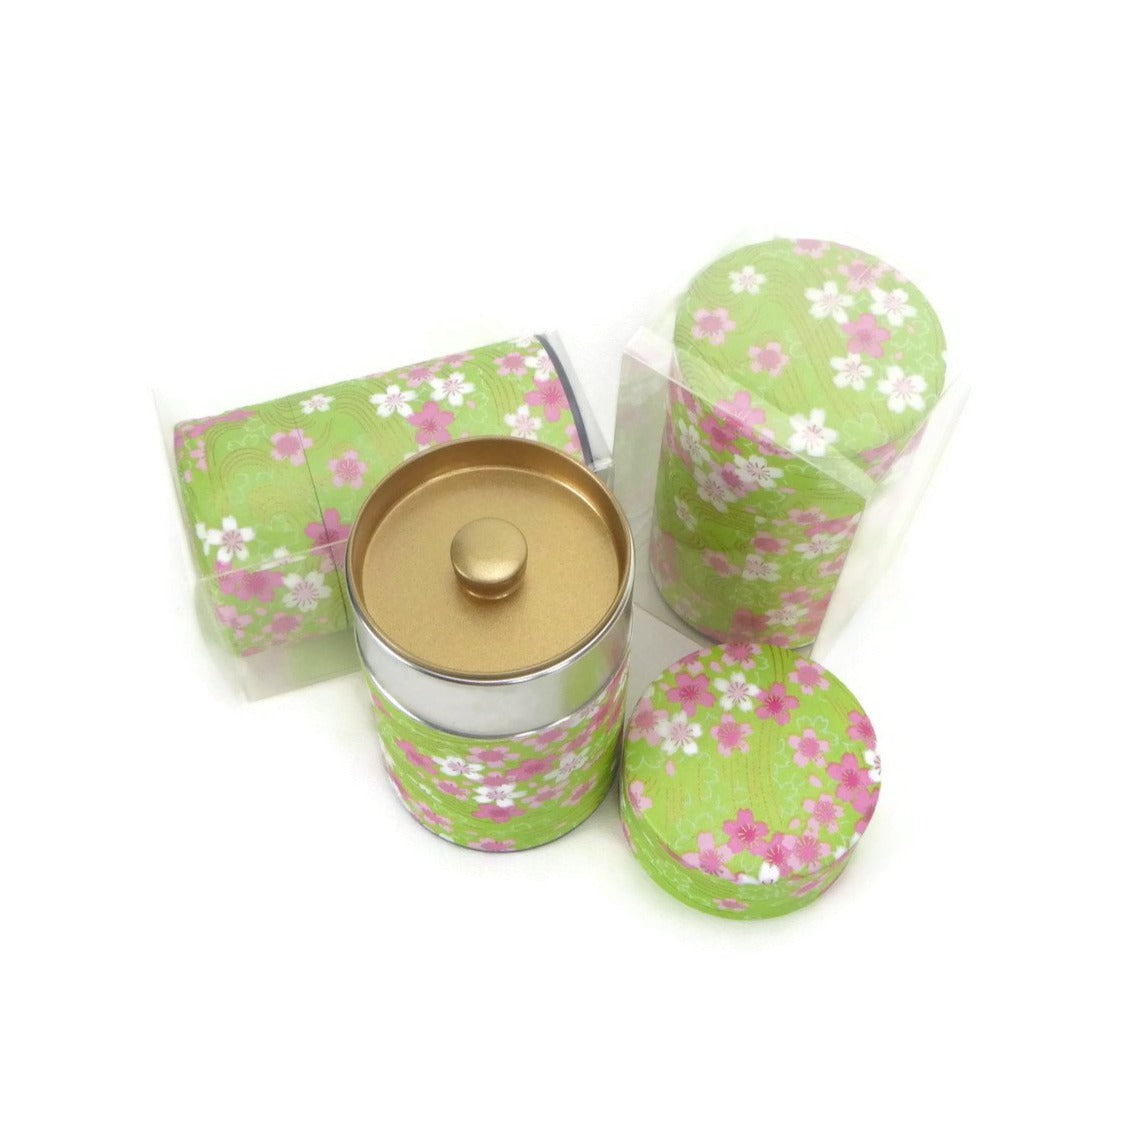 Pink and Green Floral Canister - 3.5oz